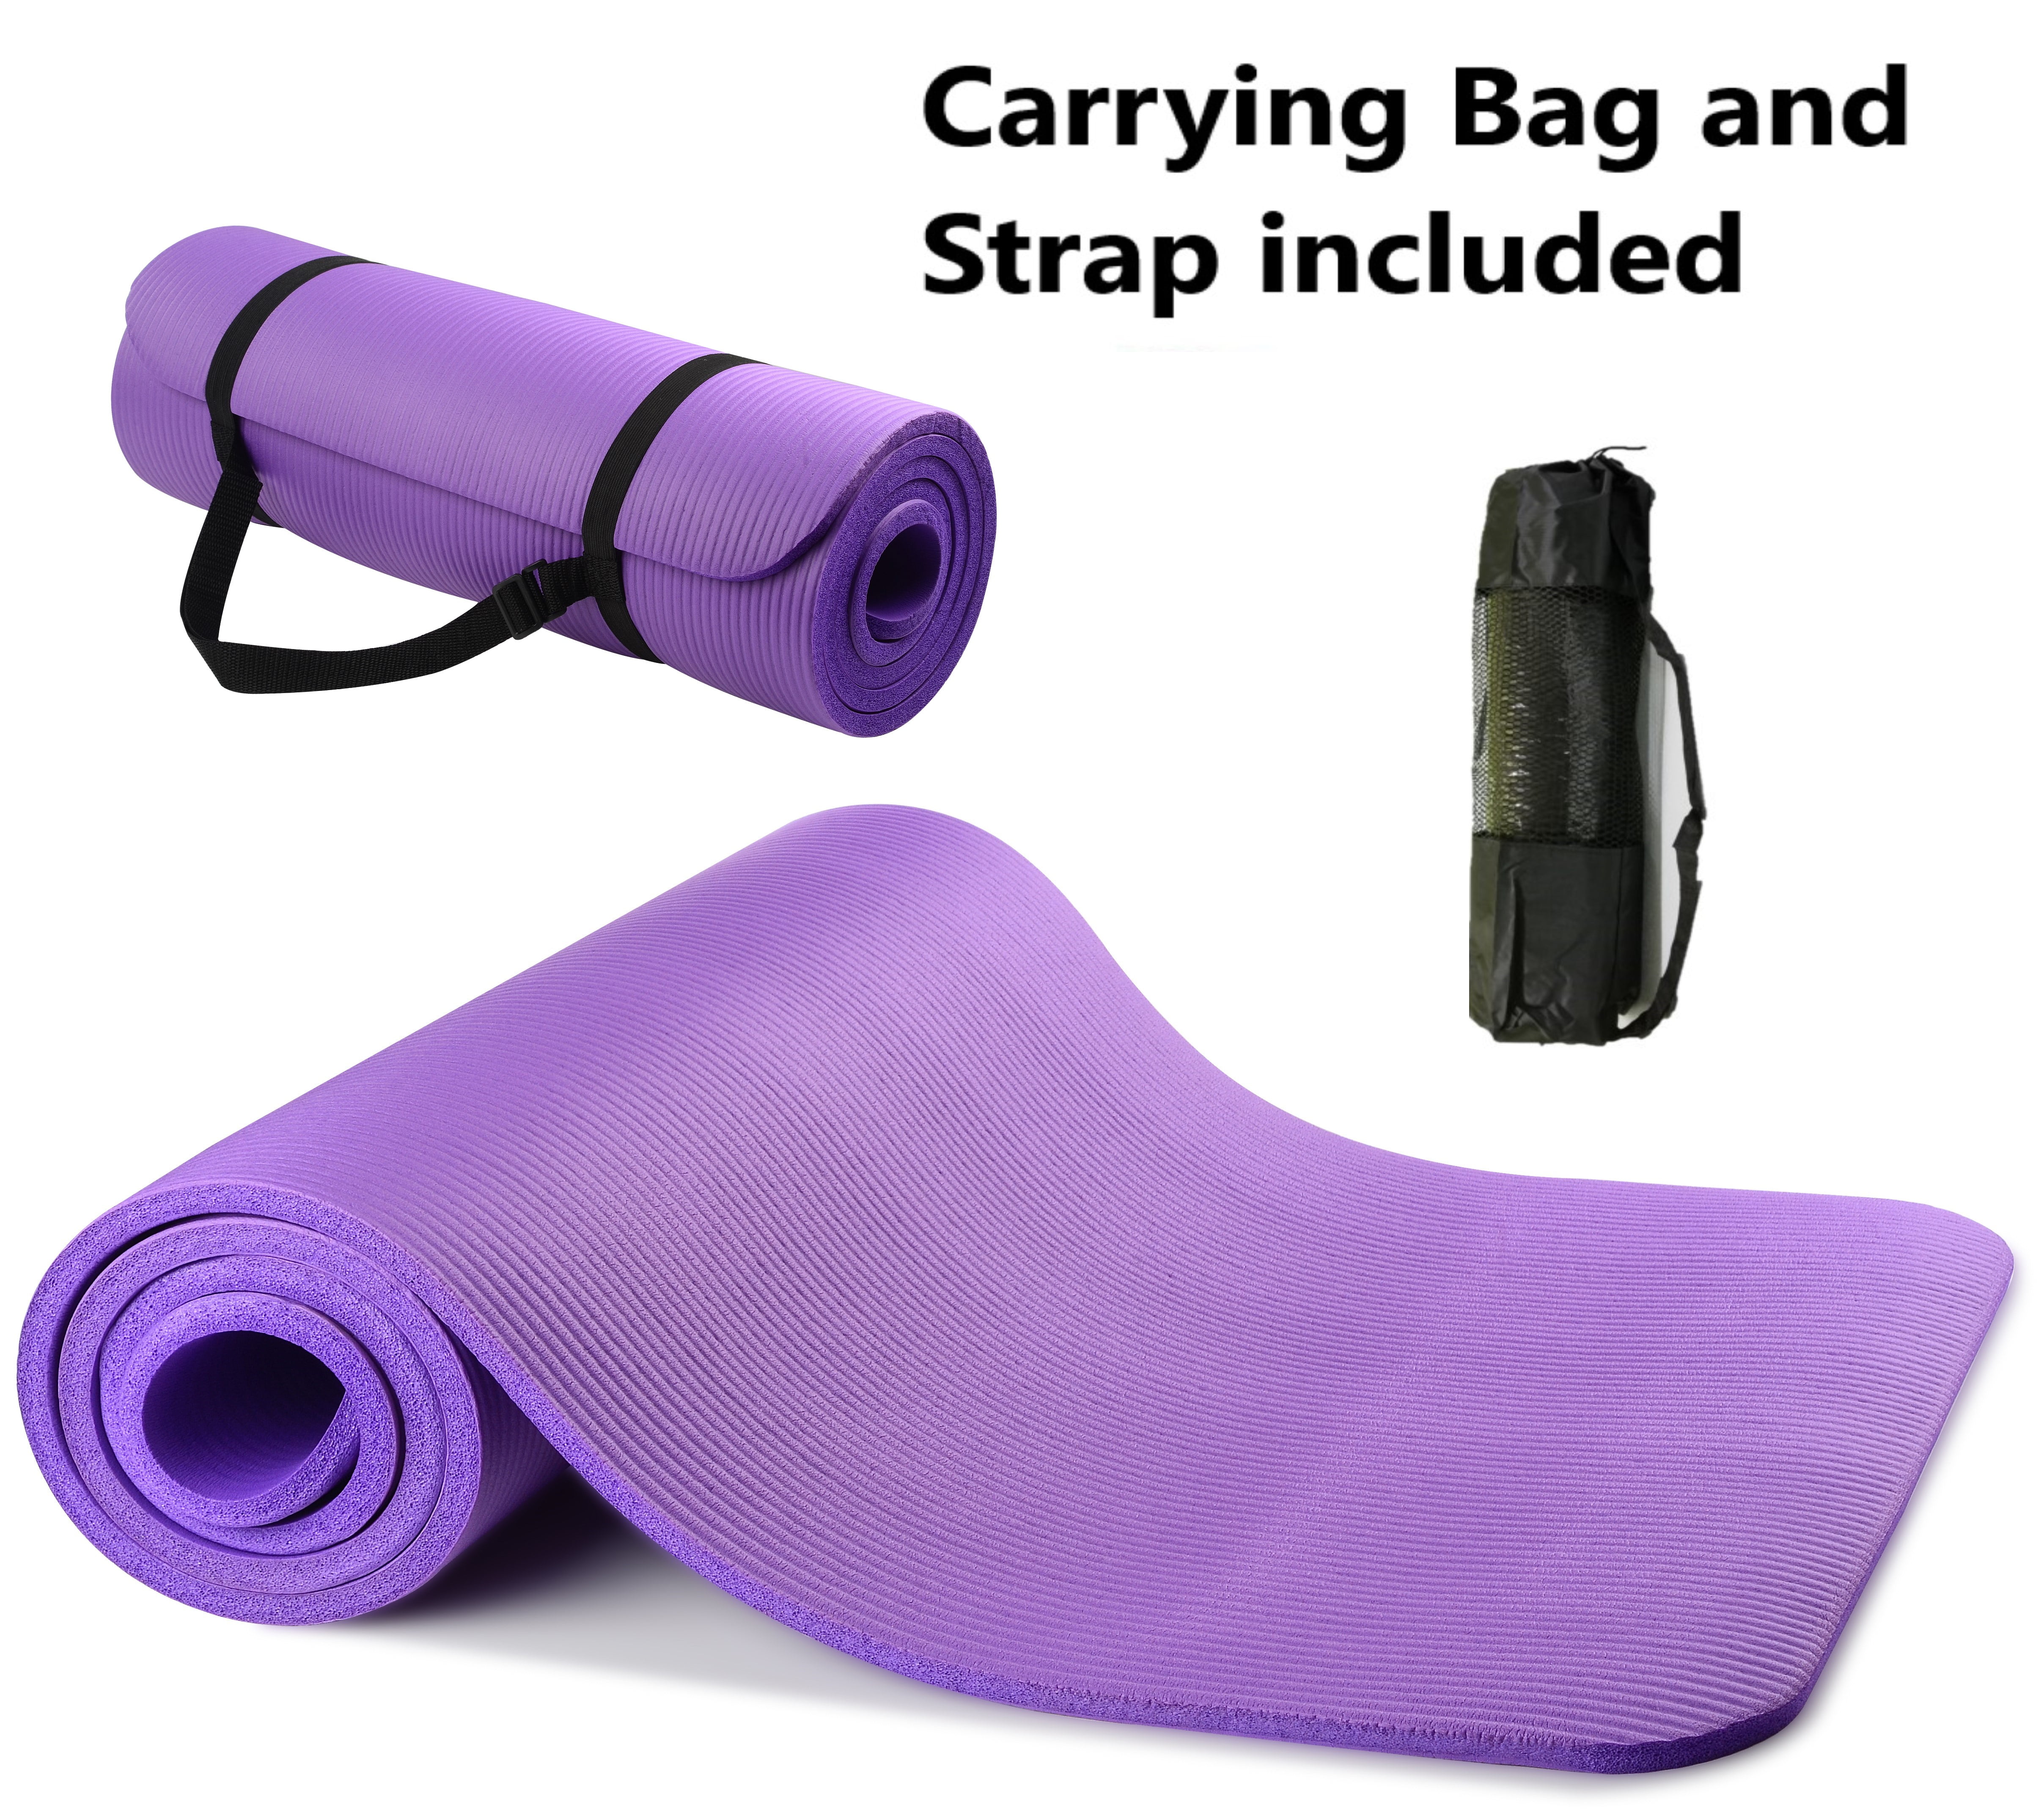 Yoga Mat for Pilates Gym Exercise Carry Strap 12mm Thick Large Comfortable NBR